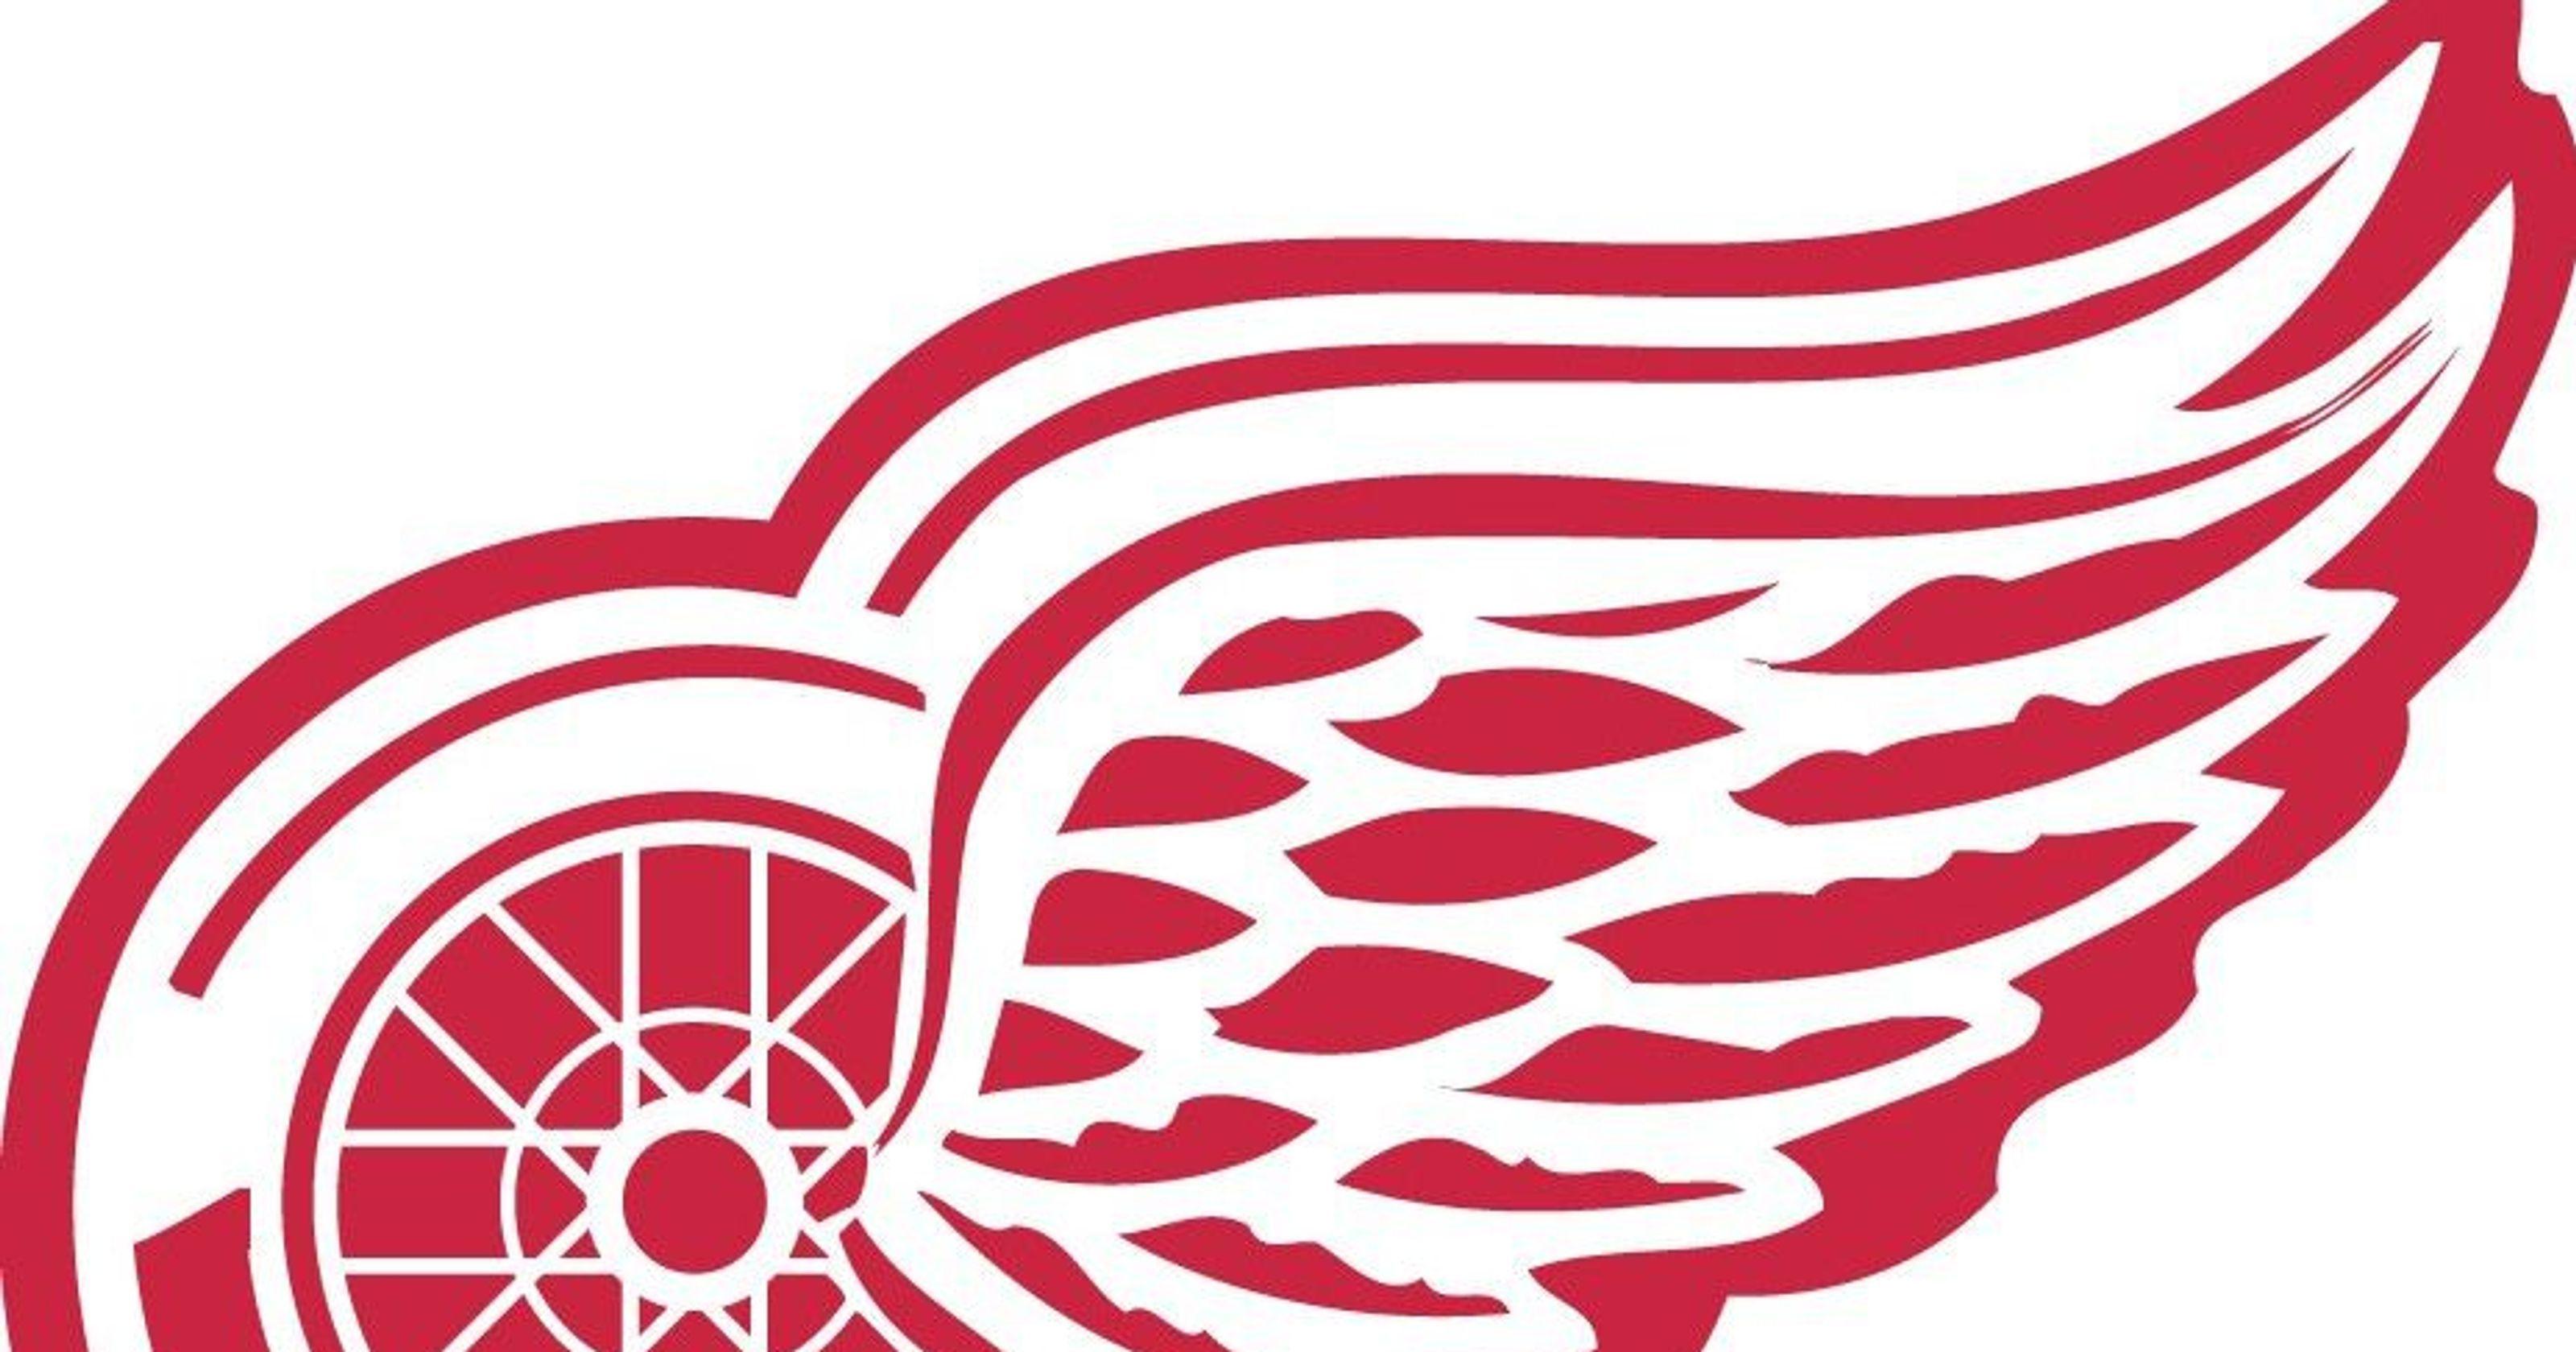 Detroit Red Wings Logo - Why did white nationalists use the Detroit Red Wings logo?